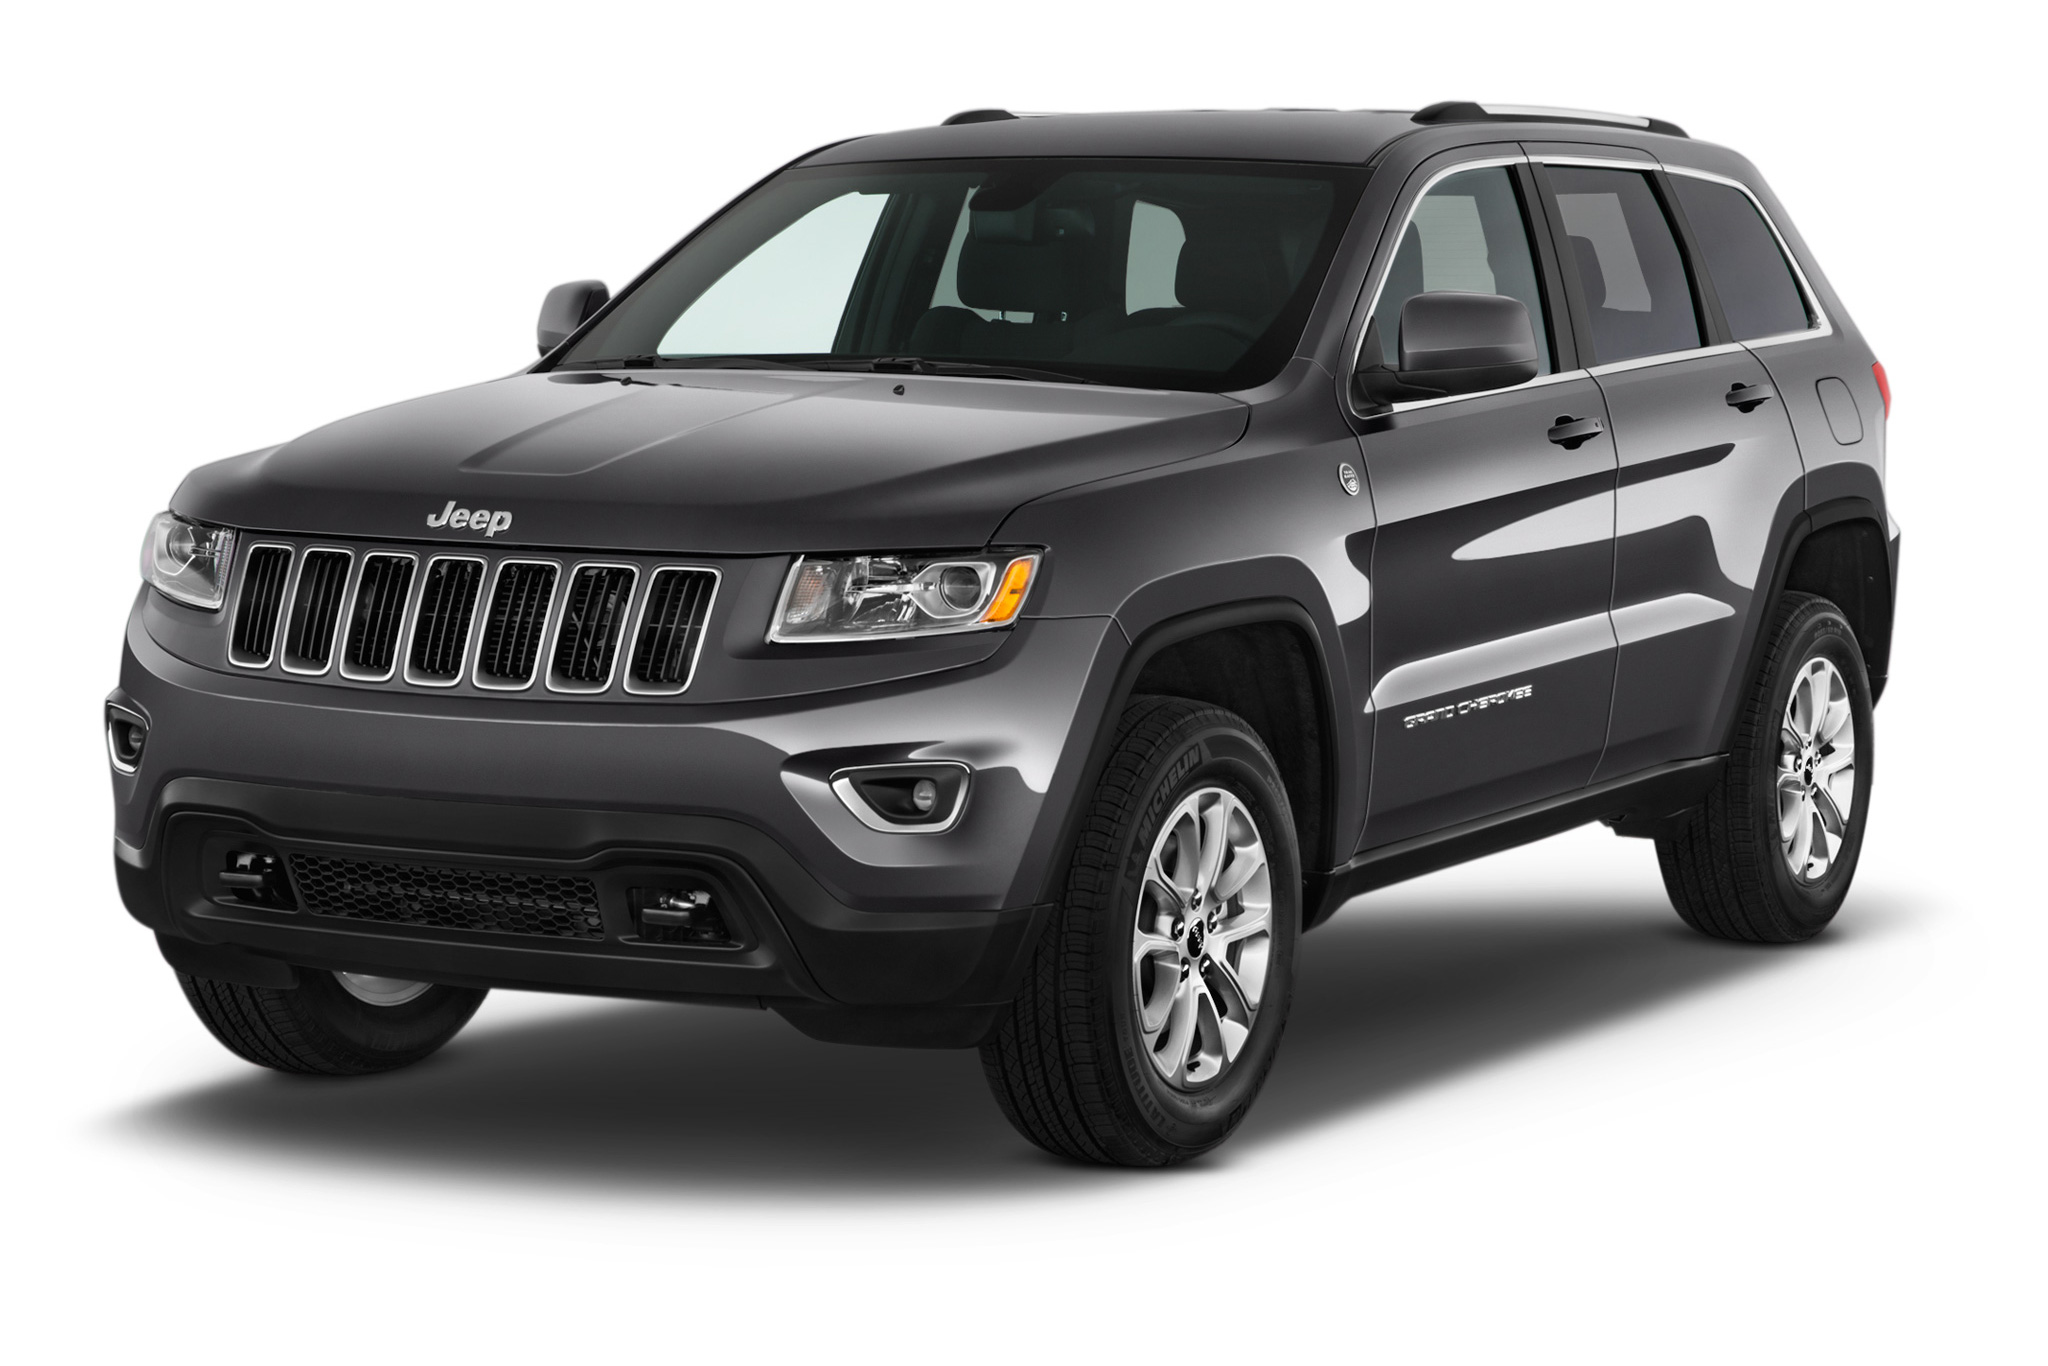 gas tank size for jeep grand cherokee